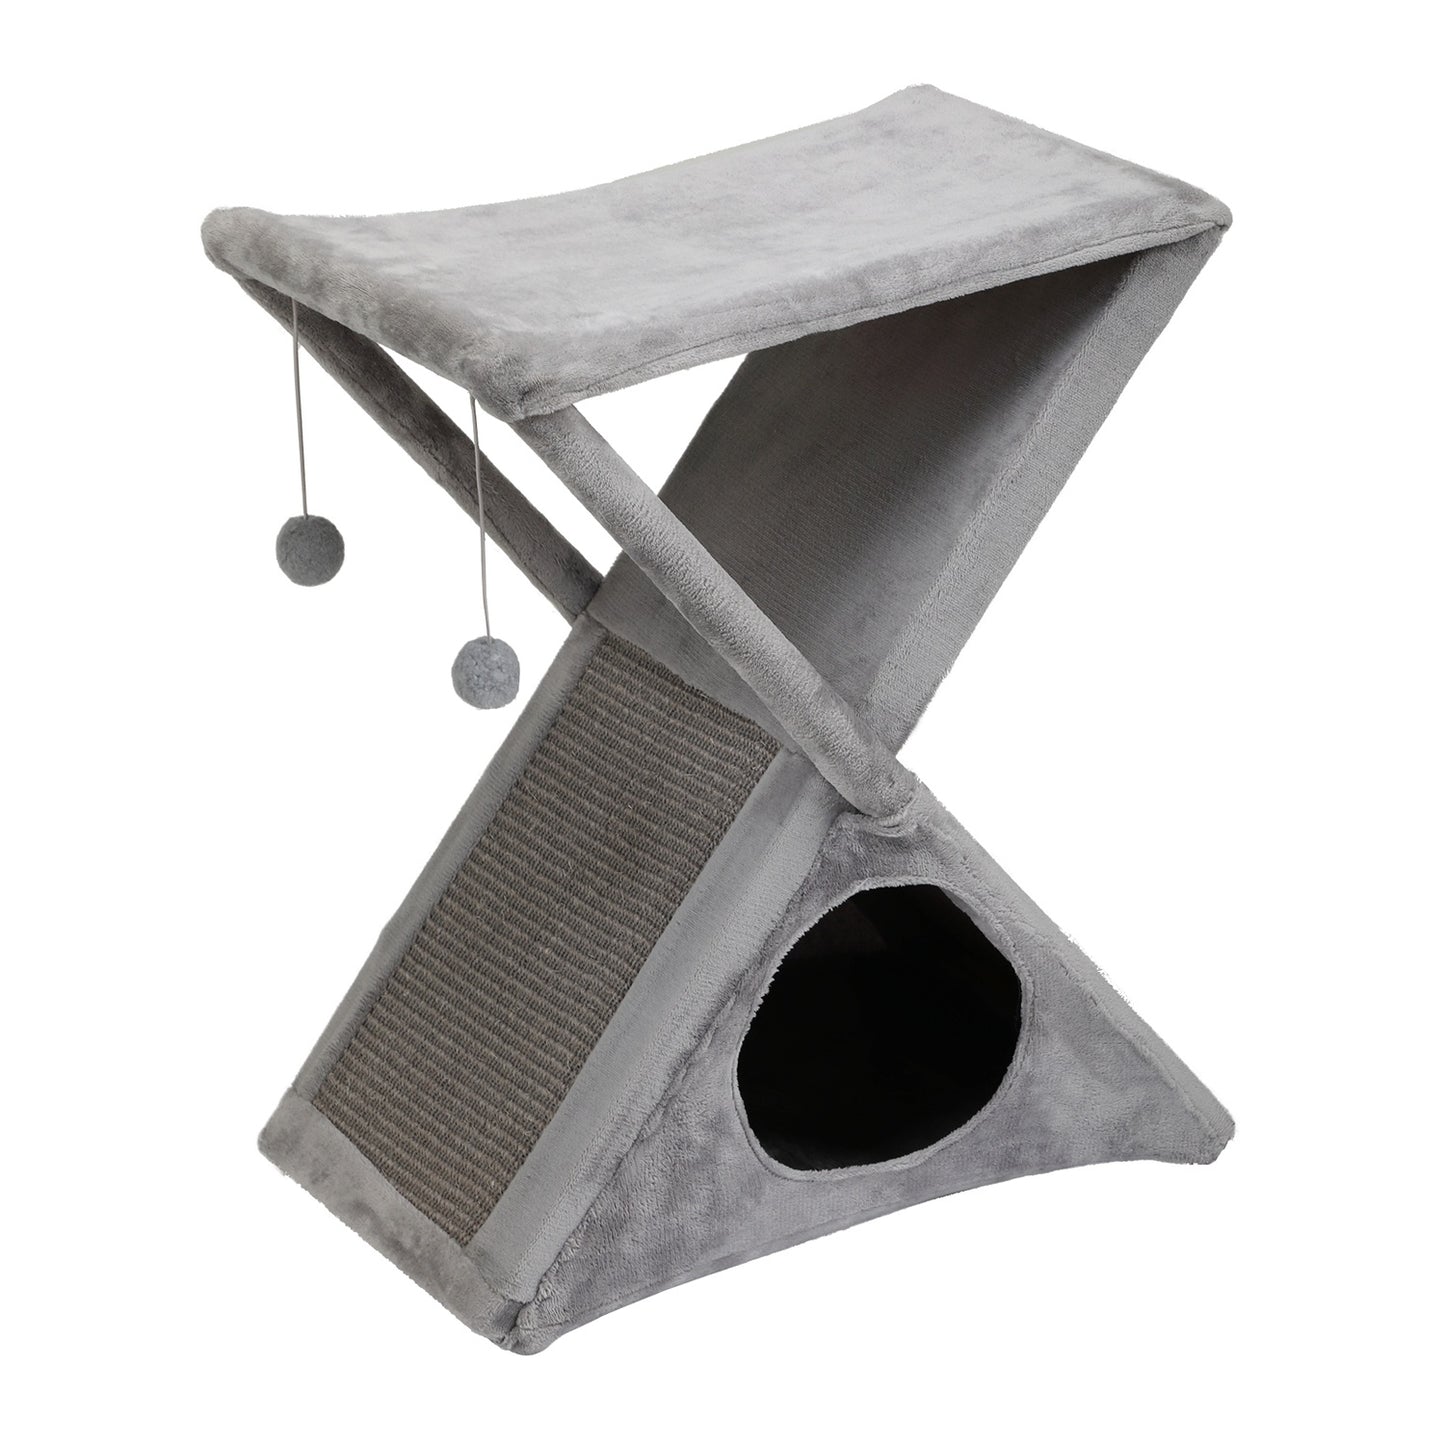 Folding Cat Tower Tree, 2-Tier Pet House with Scratching Pad, Cat Nest Hammock for Small to Middle Kitten - Gray XH